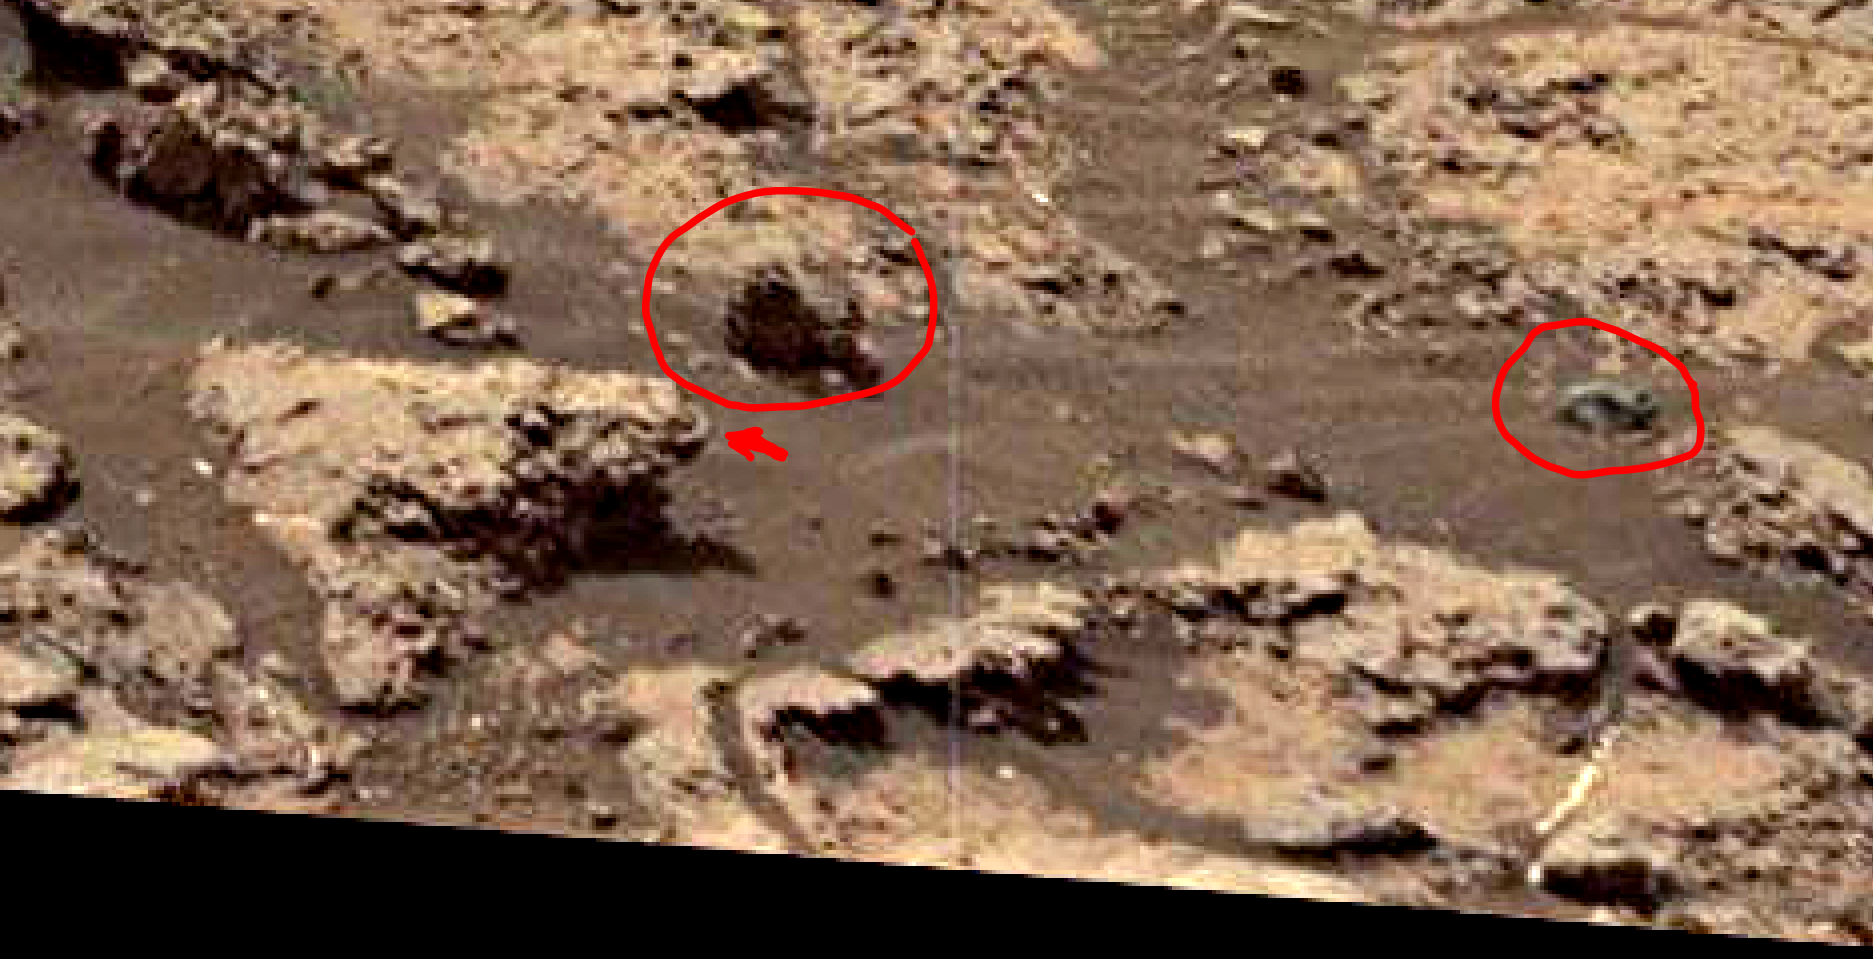 mars-sol-1485-anomaly-artifacts-16-was-life-on-mars